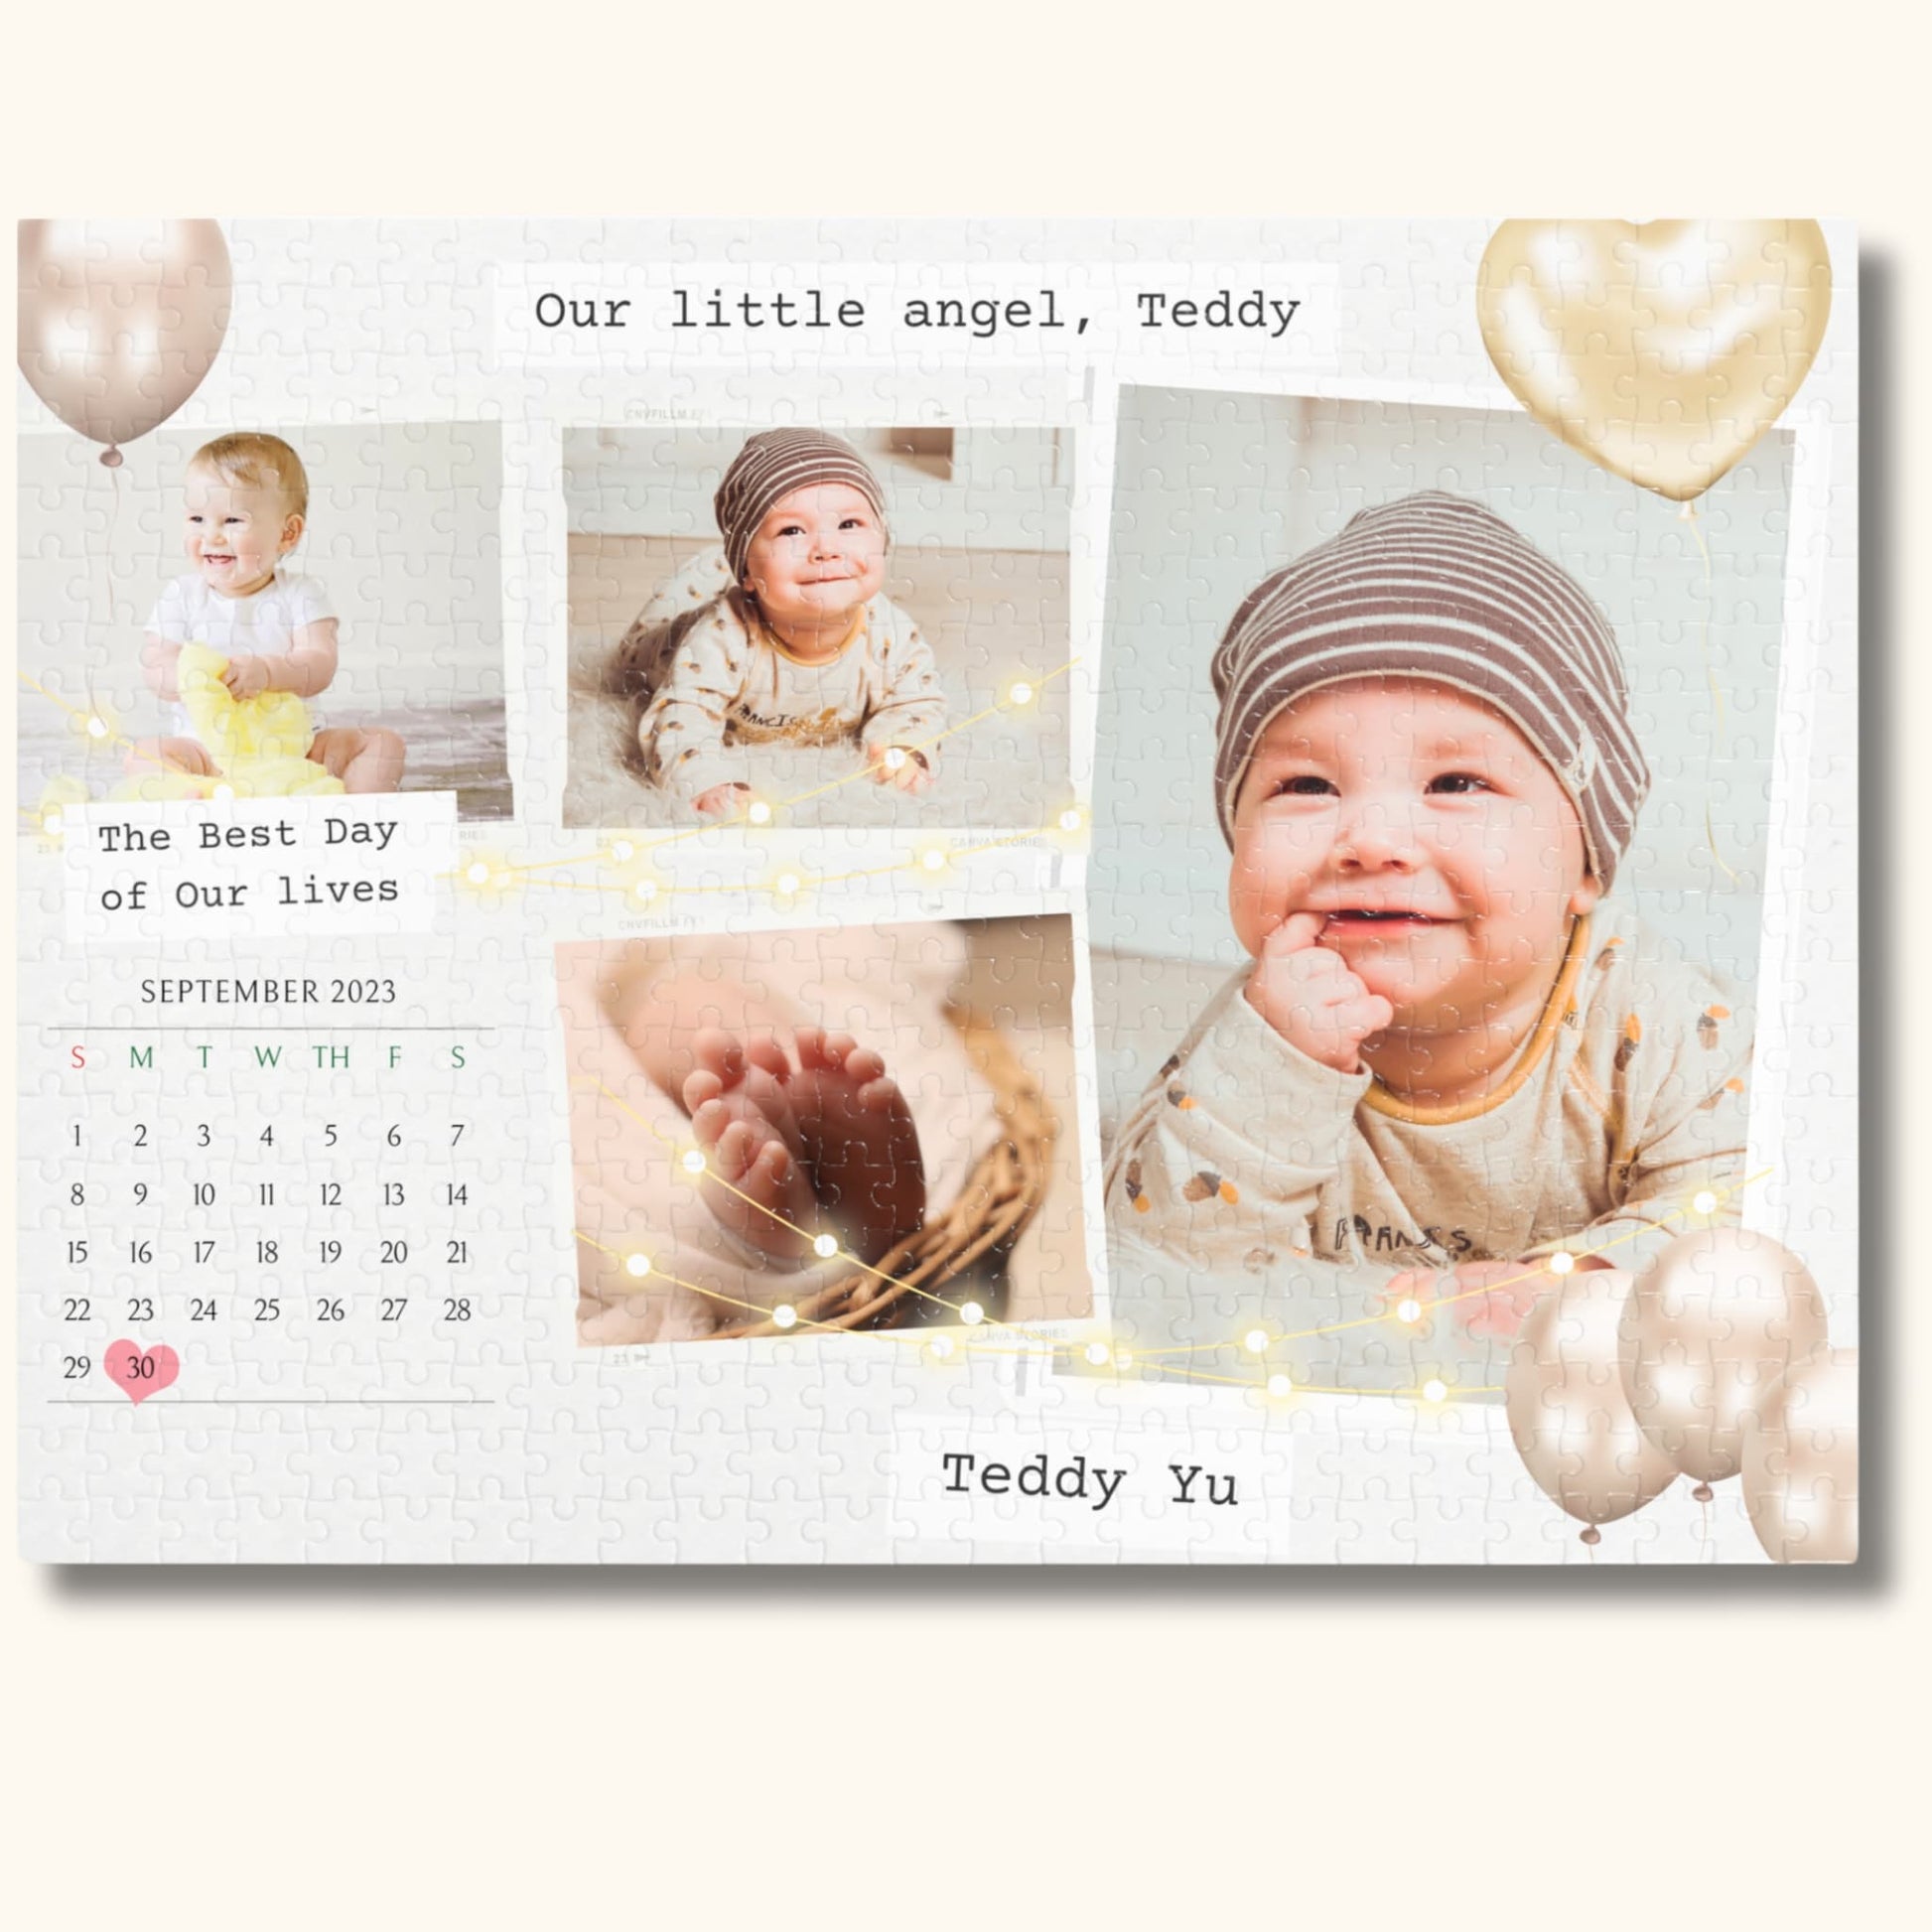 500 pieces of a custom newborn jigsaw puzzle on a beige background.